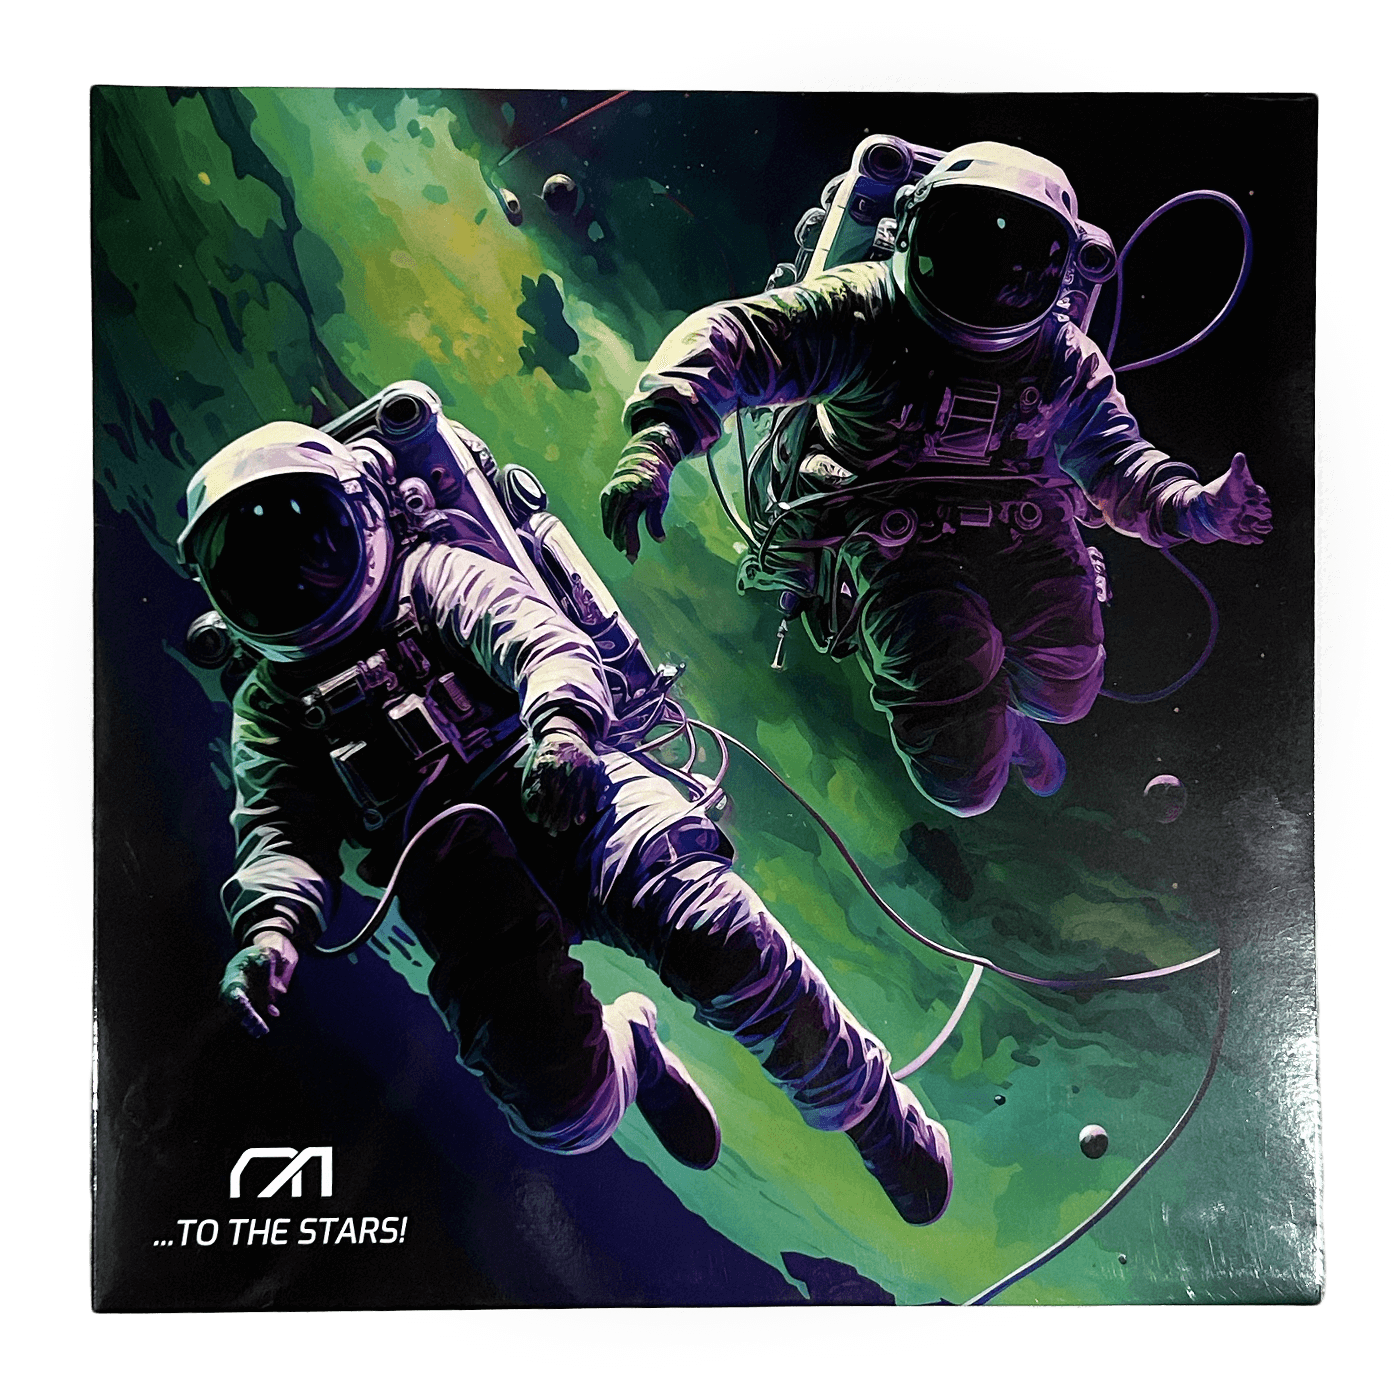 Nerd Alert's vinyl cover, showing two realistic spacemen floating in front of a green and purple galaxy, with the Nerd Alert logo in the bottom left corner.